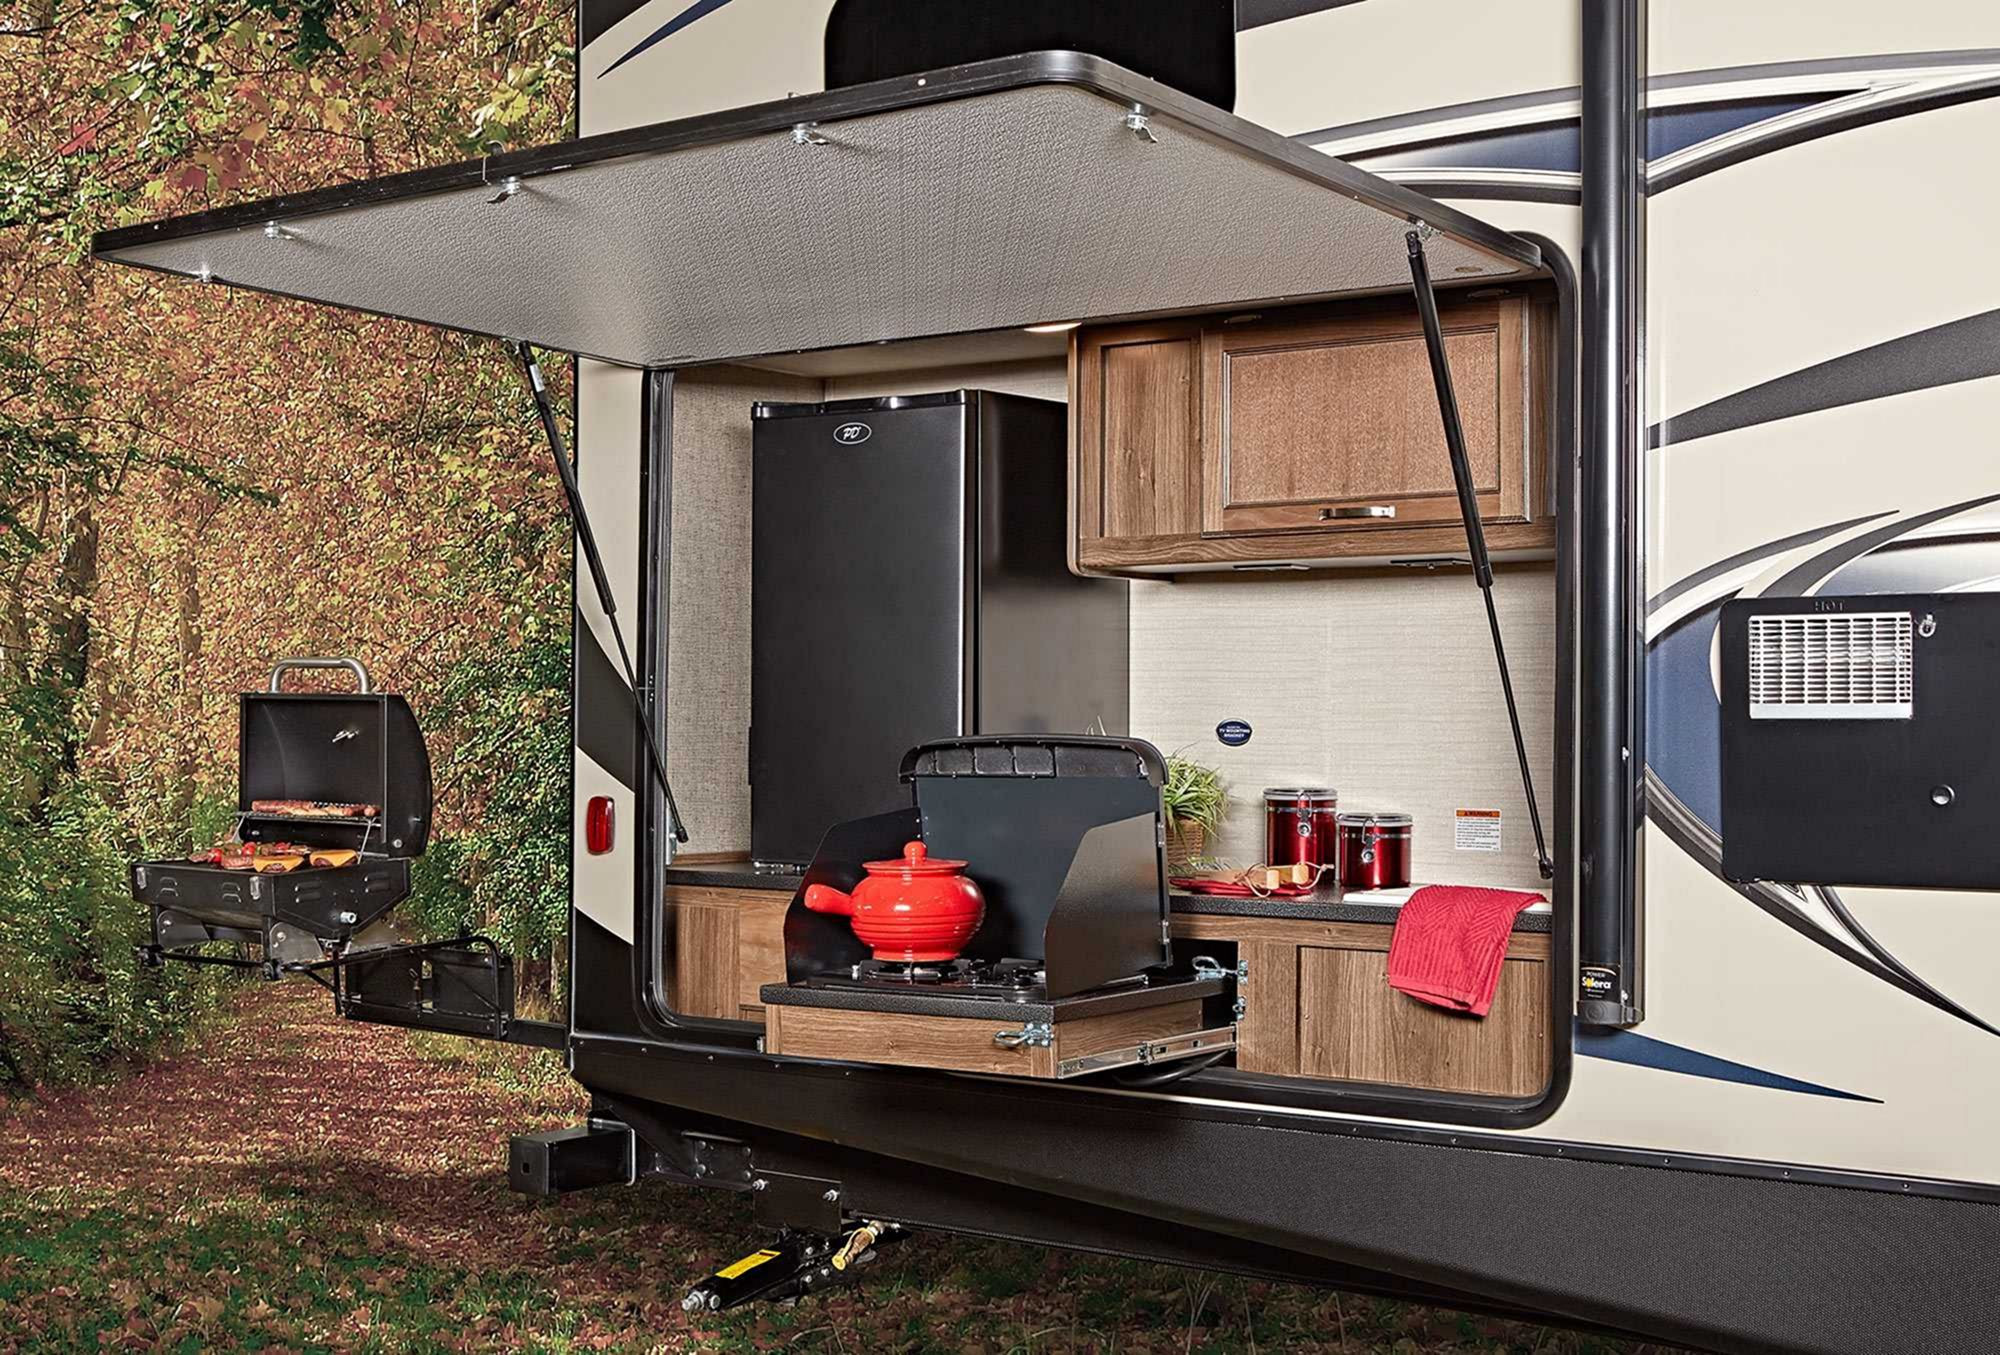 Camper Outdoor Kitchen
 Travel Trailer With Outdoor Kitchen And Bunkhouse